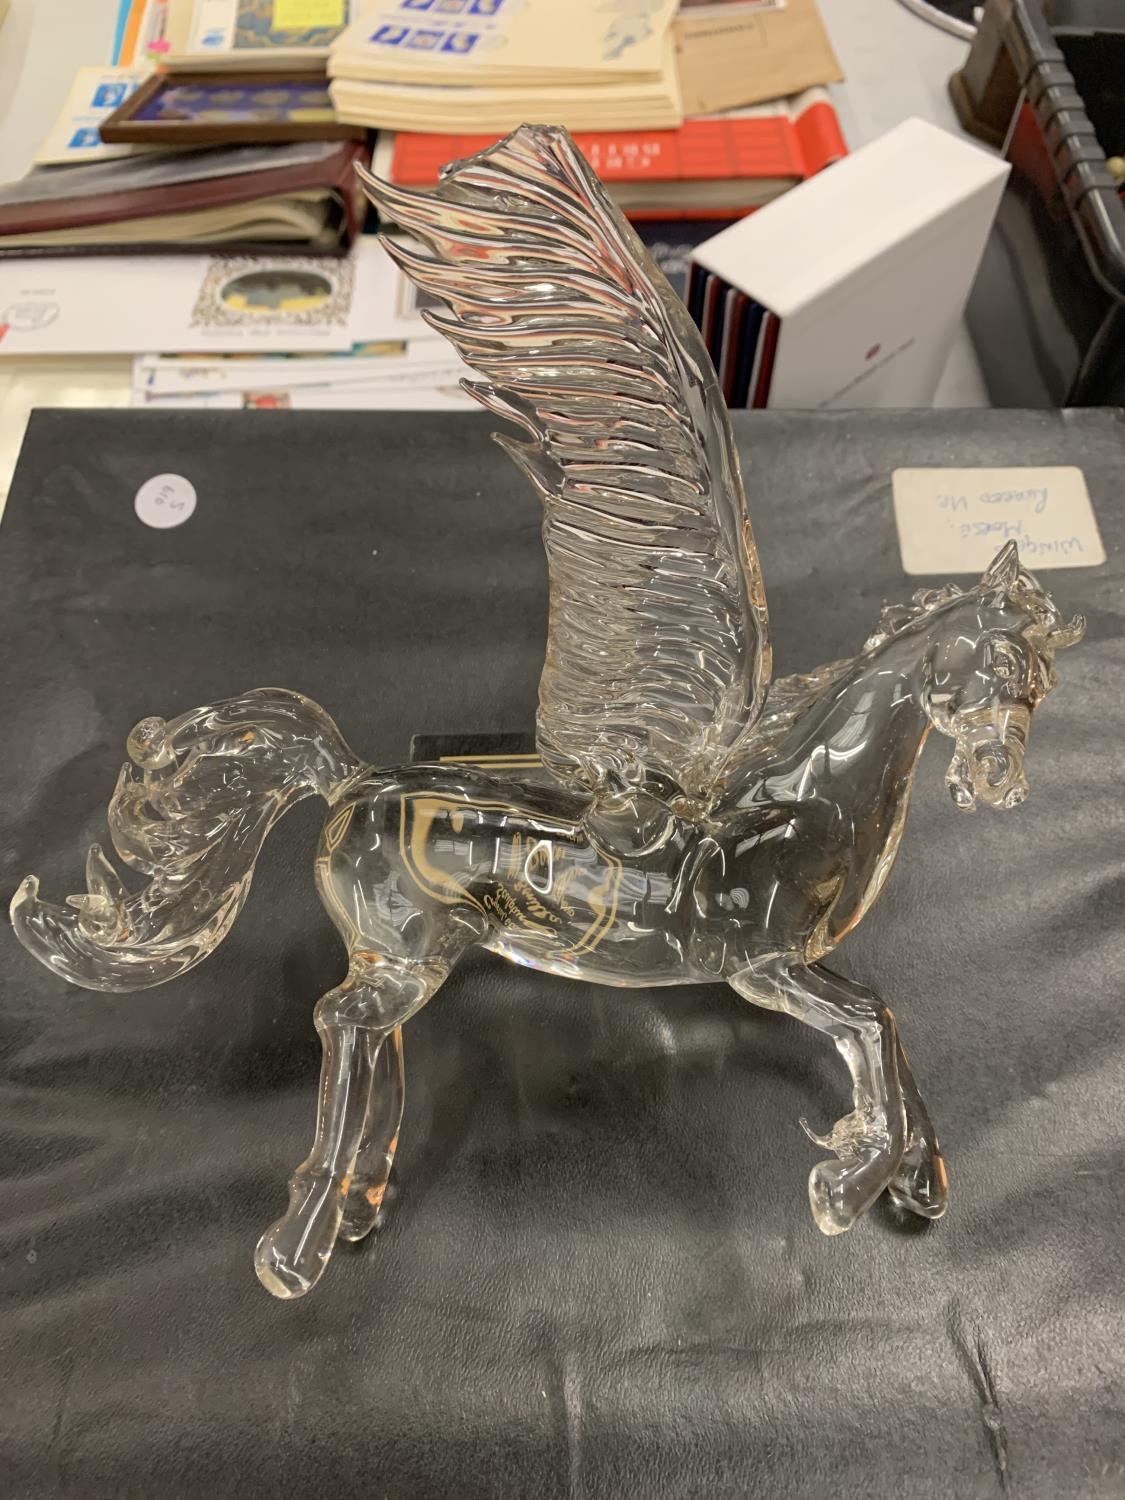 A CRYSTAL GLASS SCULPTURE OF A WINGED HORSE